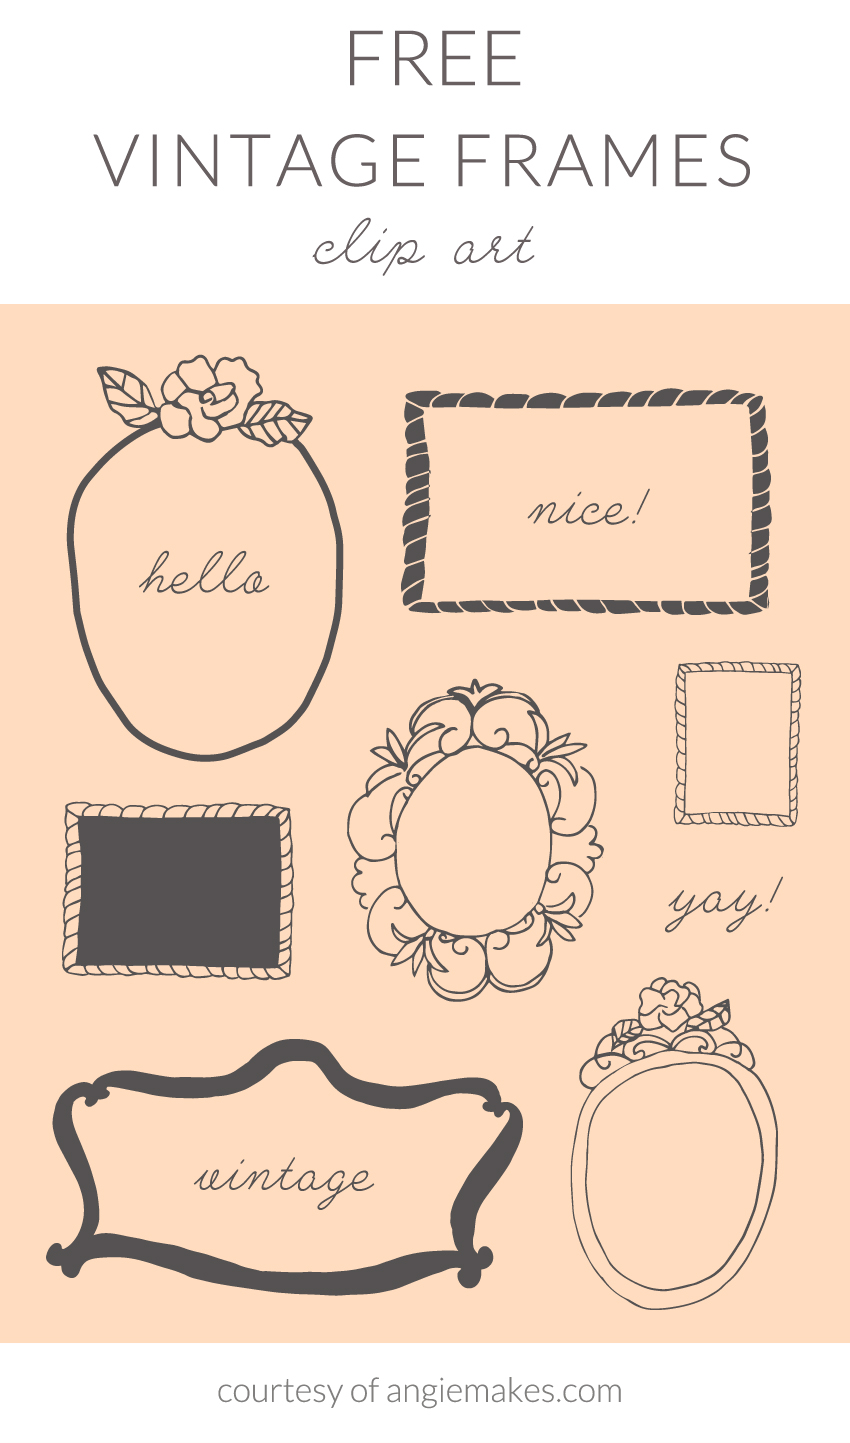 Free Vintage Frame Clip Art - Angie Makes | angiemakes.com